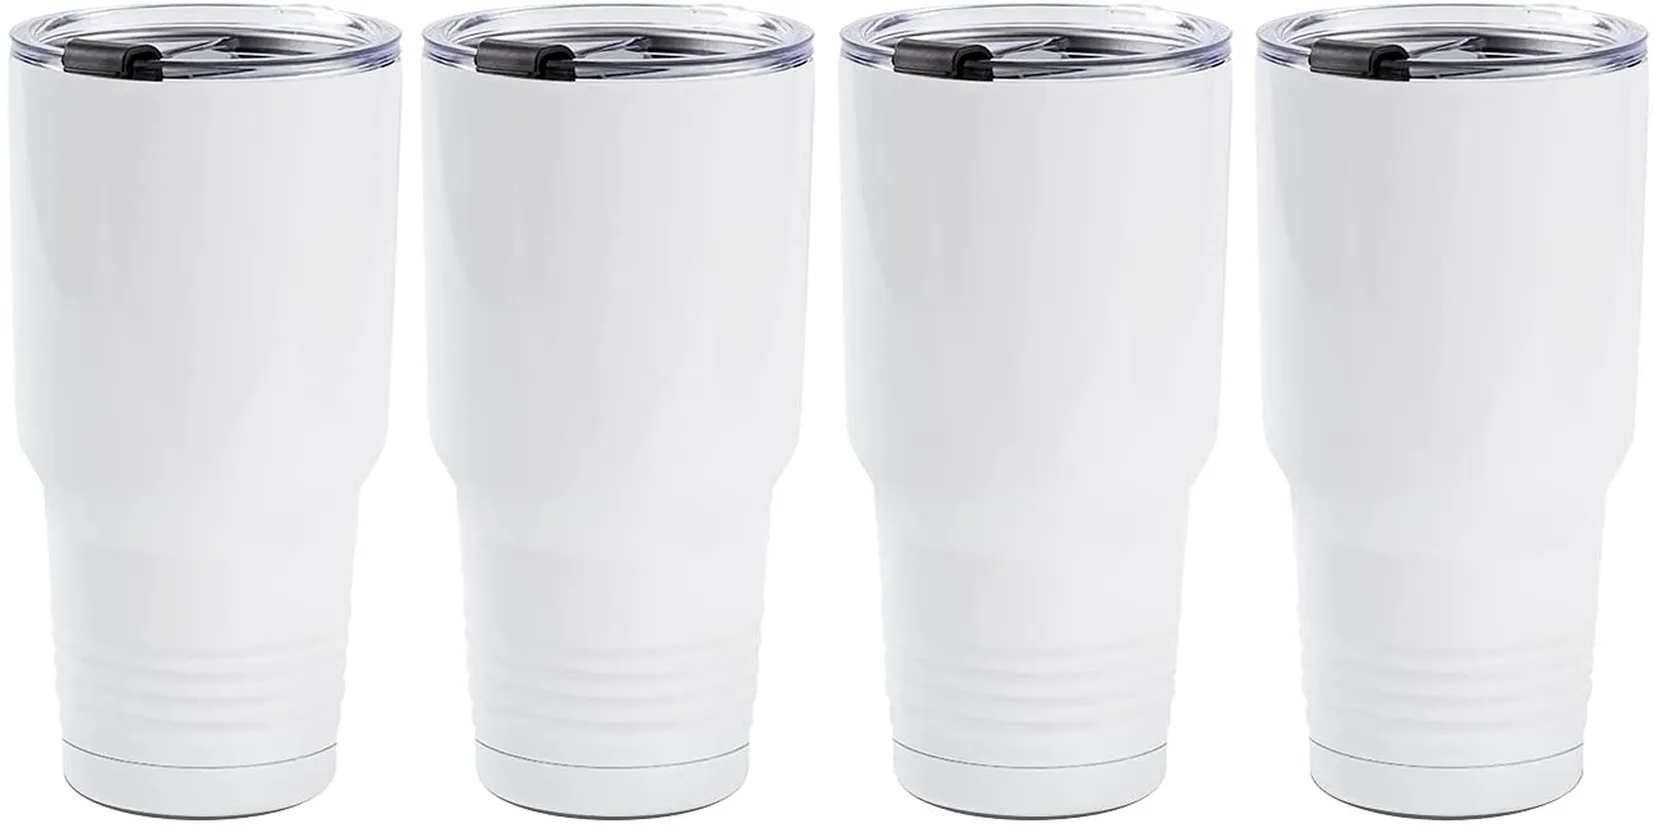 Sublimation Tumbler Blanks 30 OZ White Stainless Steel Coffee Travel Tumbler Car Cups with Lid Sublimation Mugs Cups sxa22